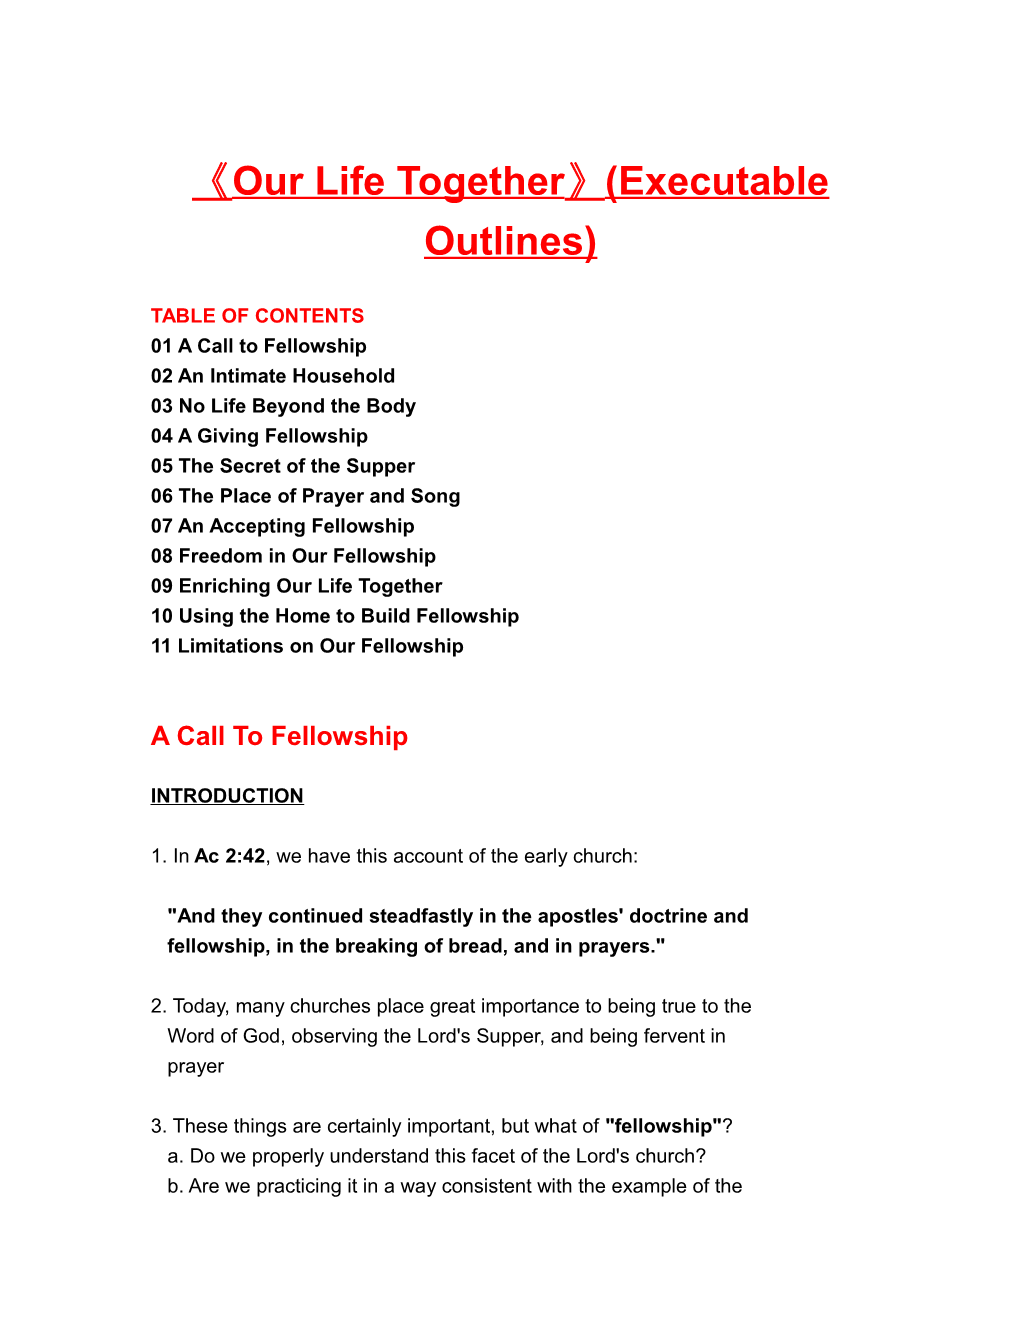 Our Life Together (Executable Outlines)